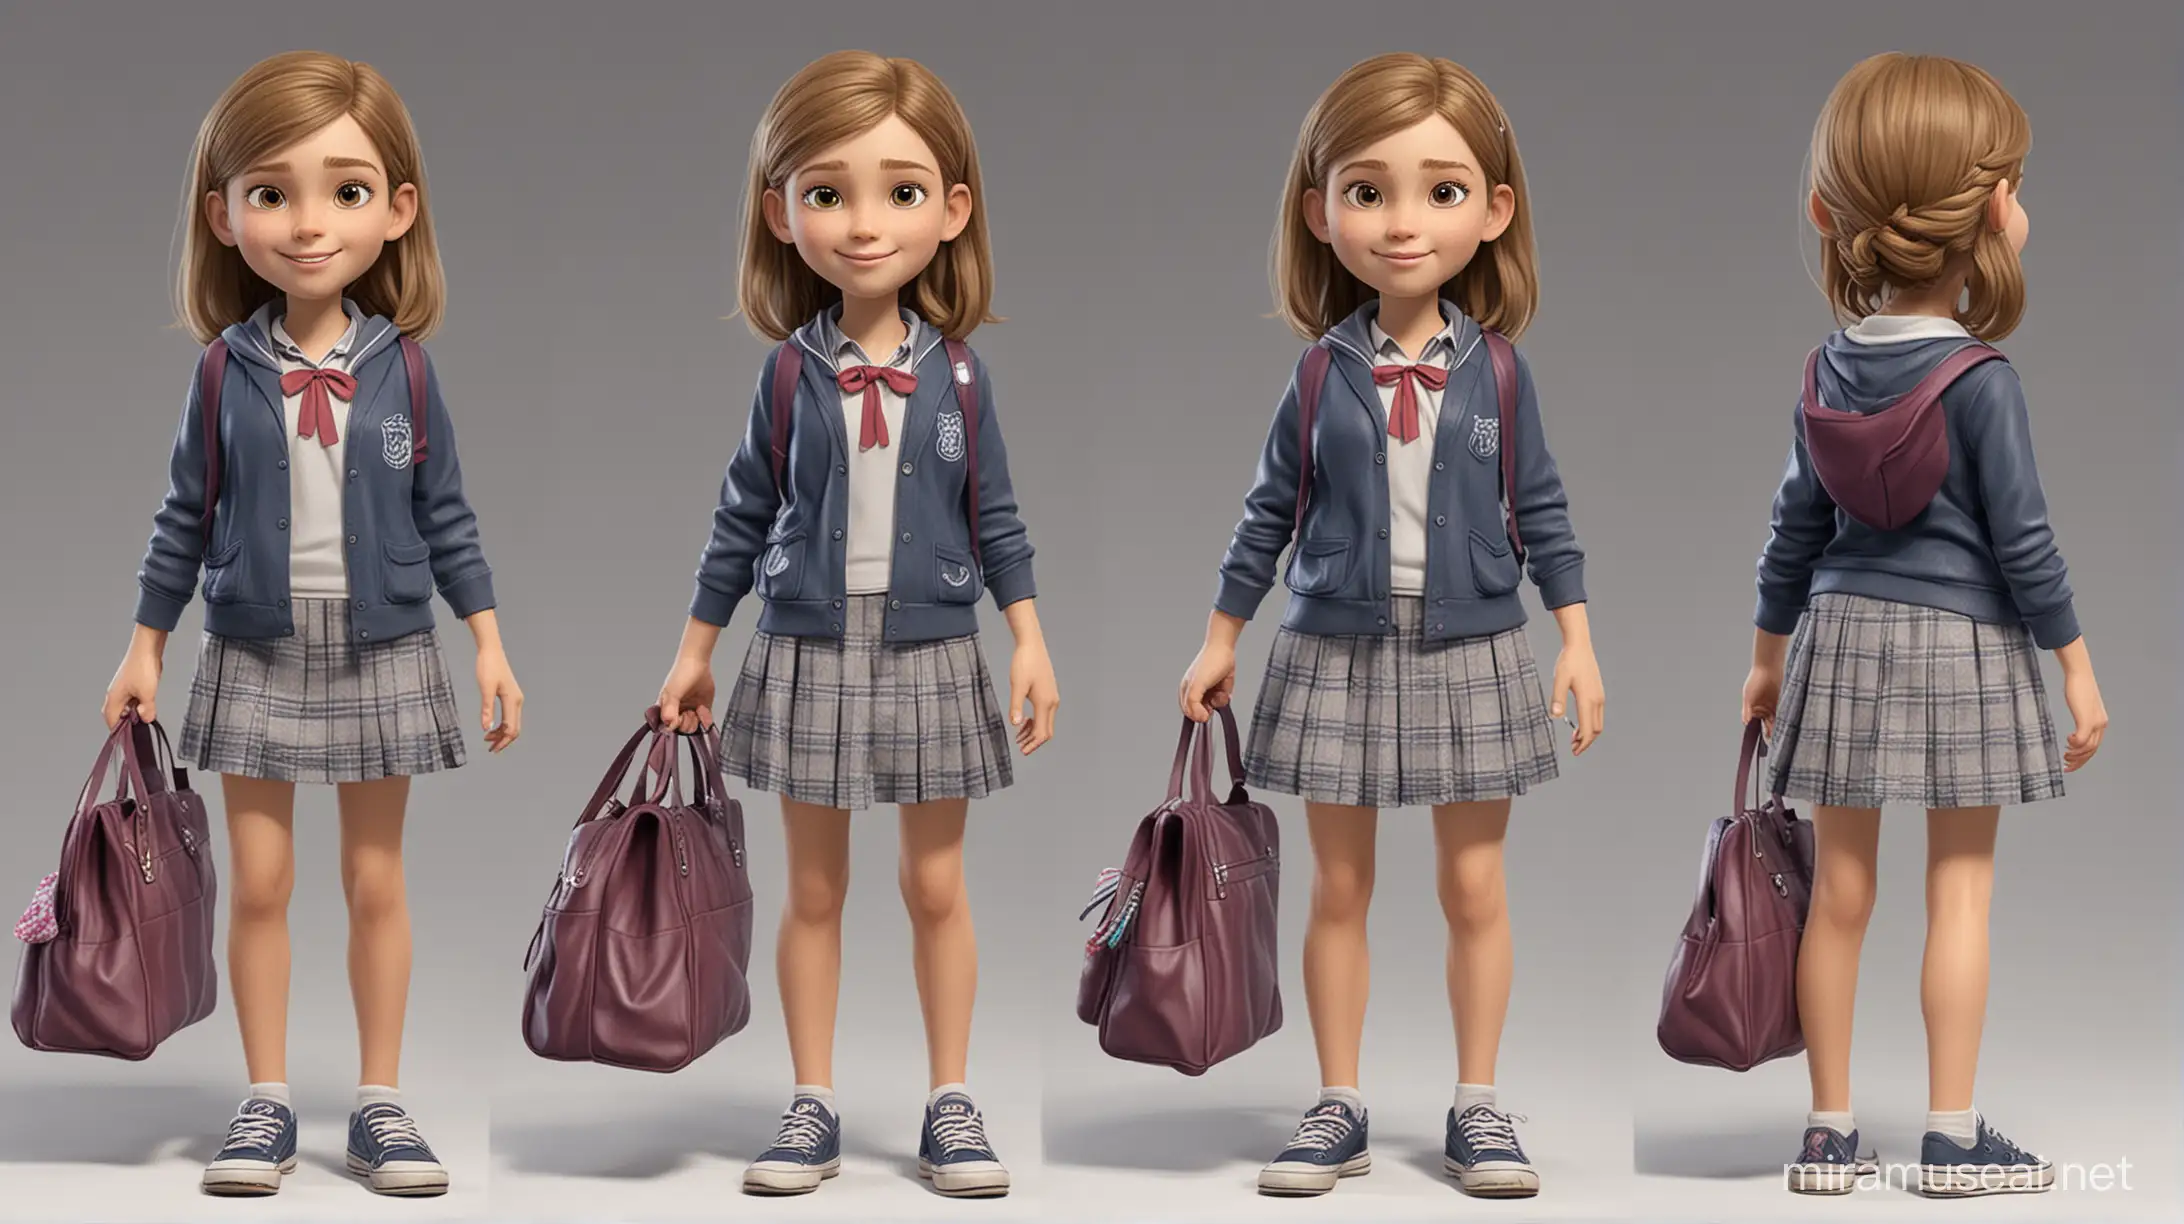 Create a character that is an eight-year-old girl and create an image with her school clothes and bag